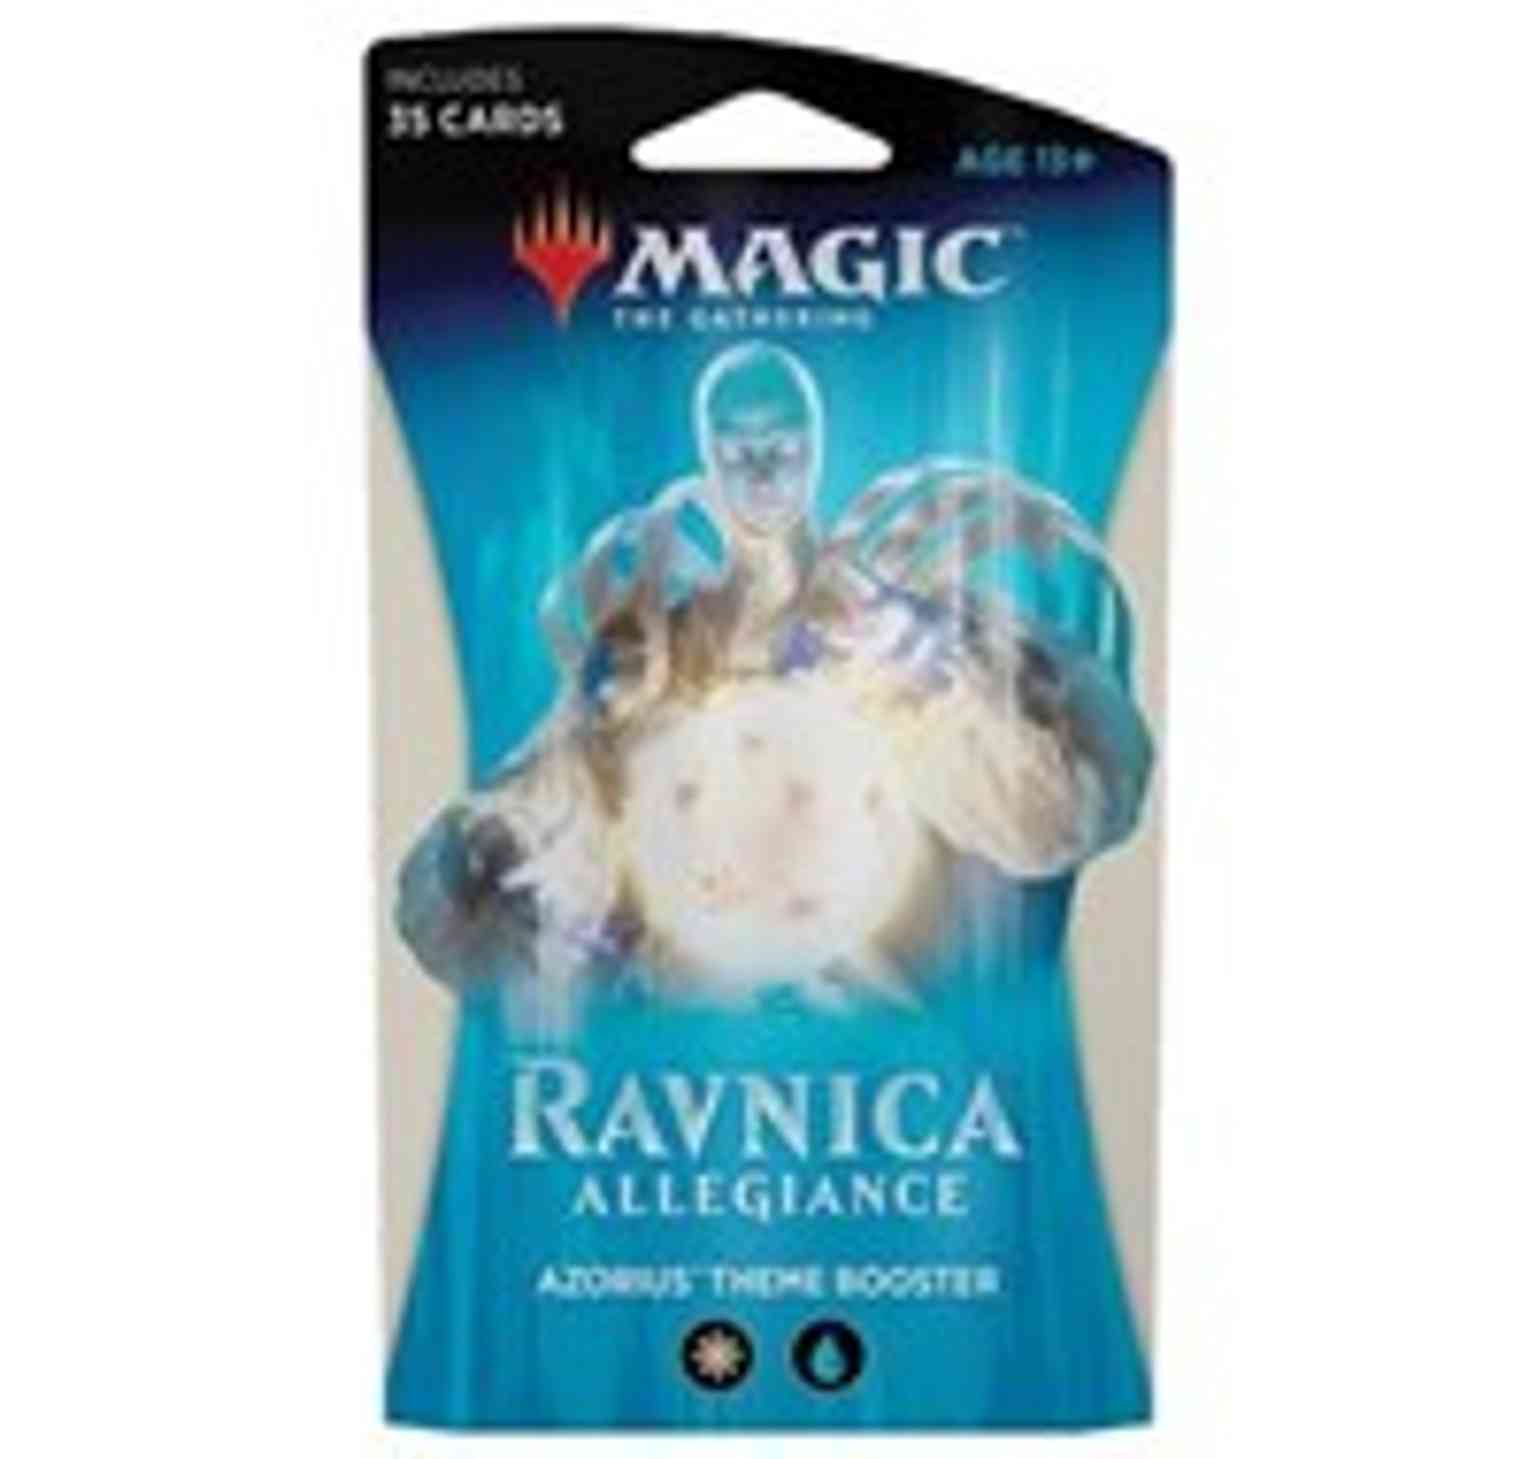 Ravnica Allegiance - Themed Booster Pack [Azorius] magic card front